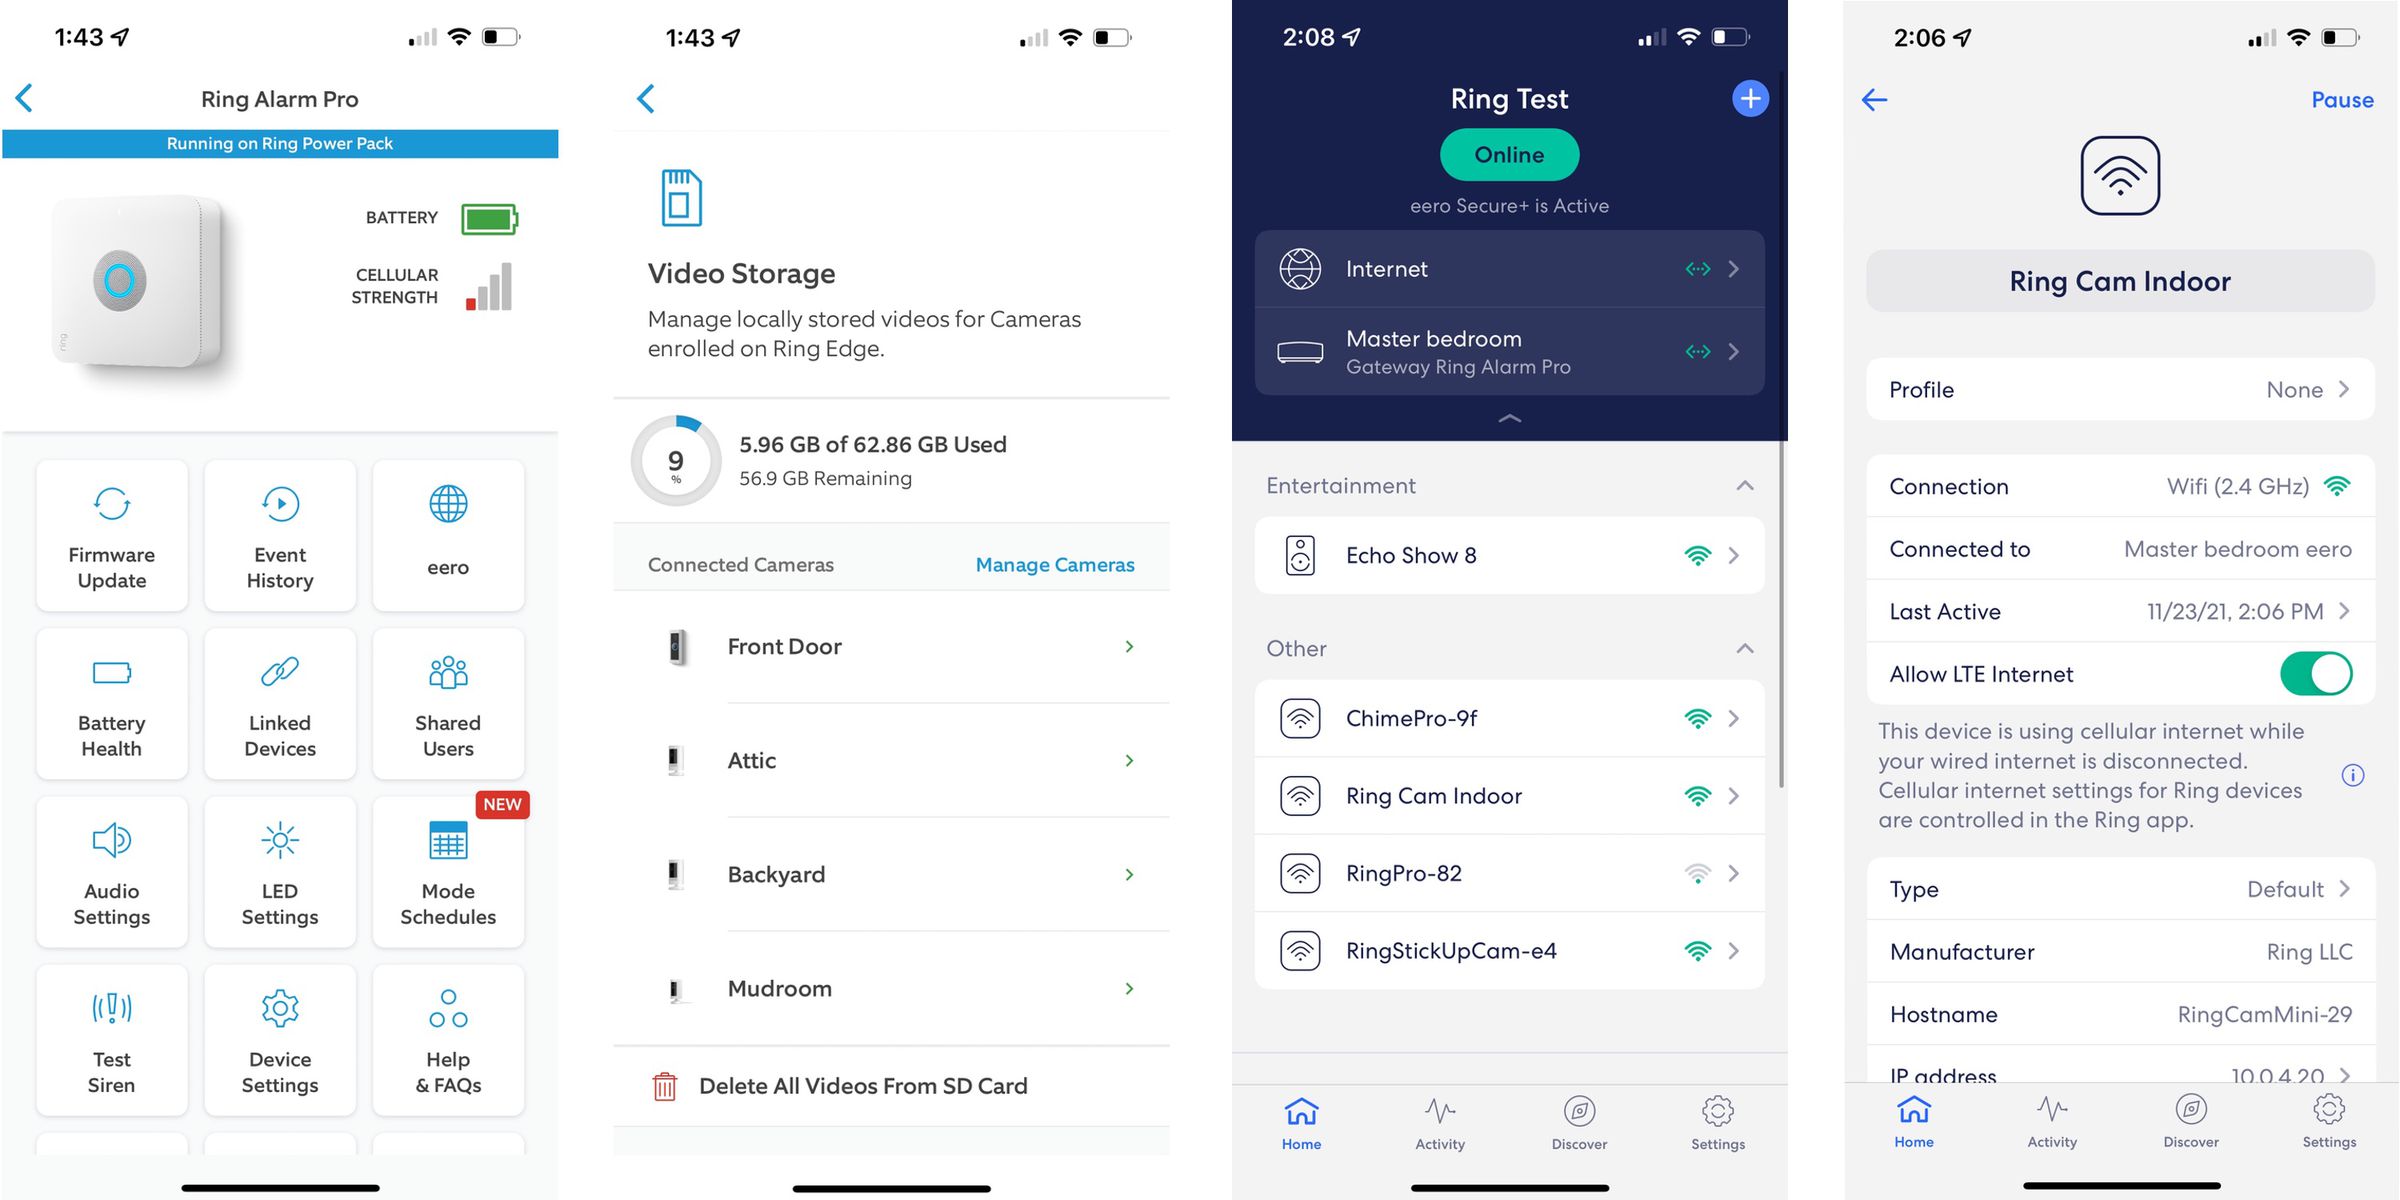 You manage the Ring Alarm Pro’s extra features such as video storage, cellular data, and backup power in the Ring app (left two images). The Eero Wi-Fi network is controlled in the Eero app (right two images), where you can select which devices on your network should use Ring’s LTE backup internet.